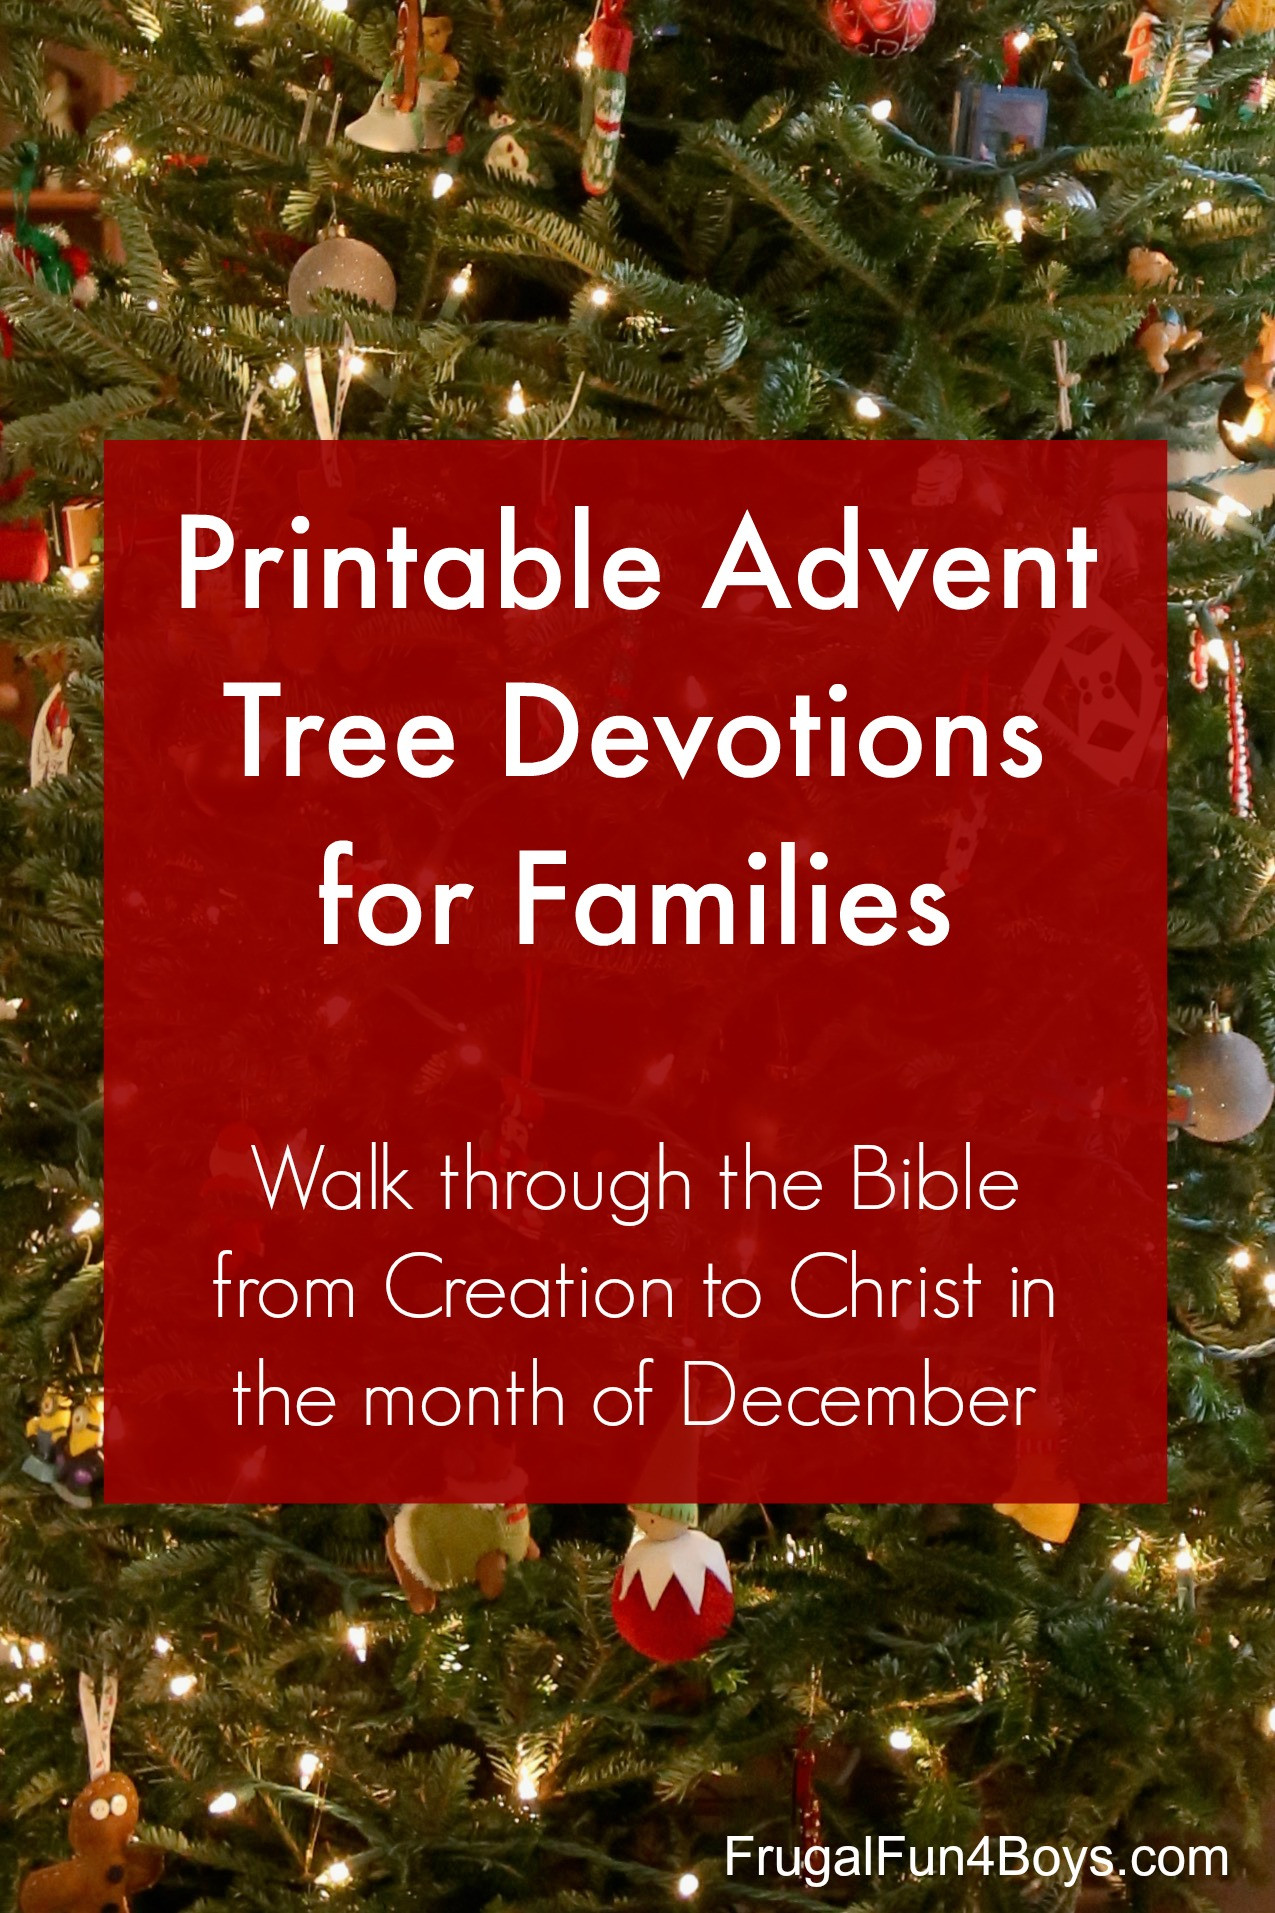 Christmas Devotional Ideas
 Download and Print Advent Jesse Tree Devotions Frugal